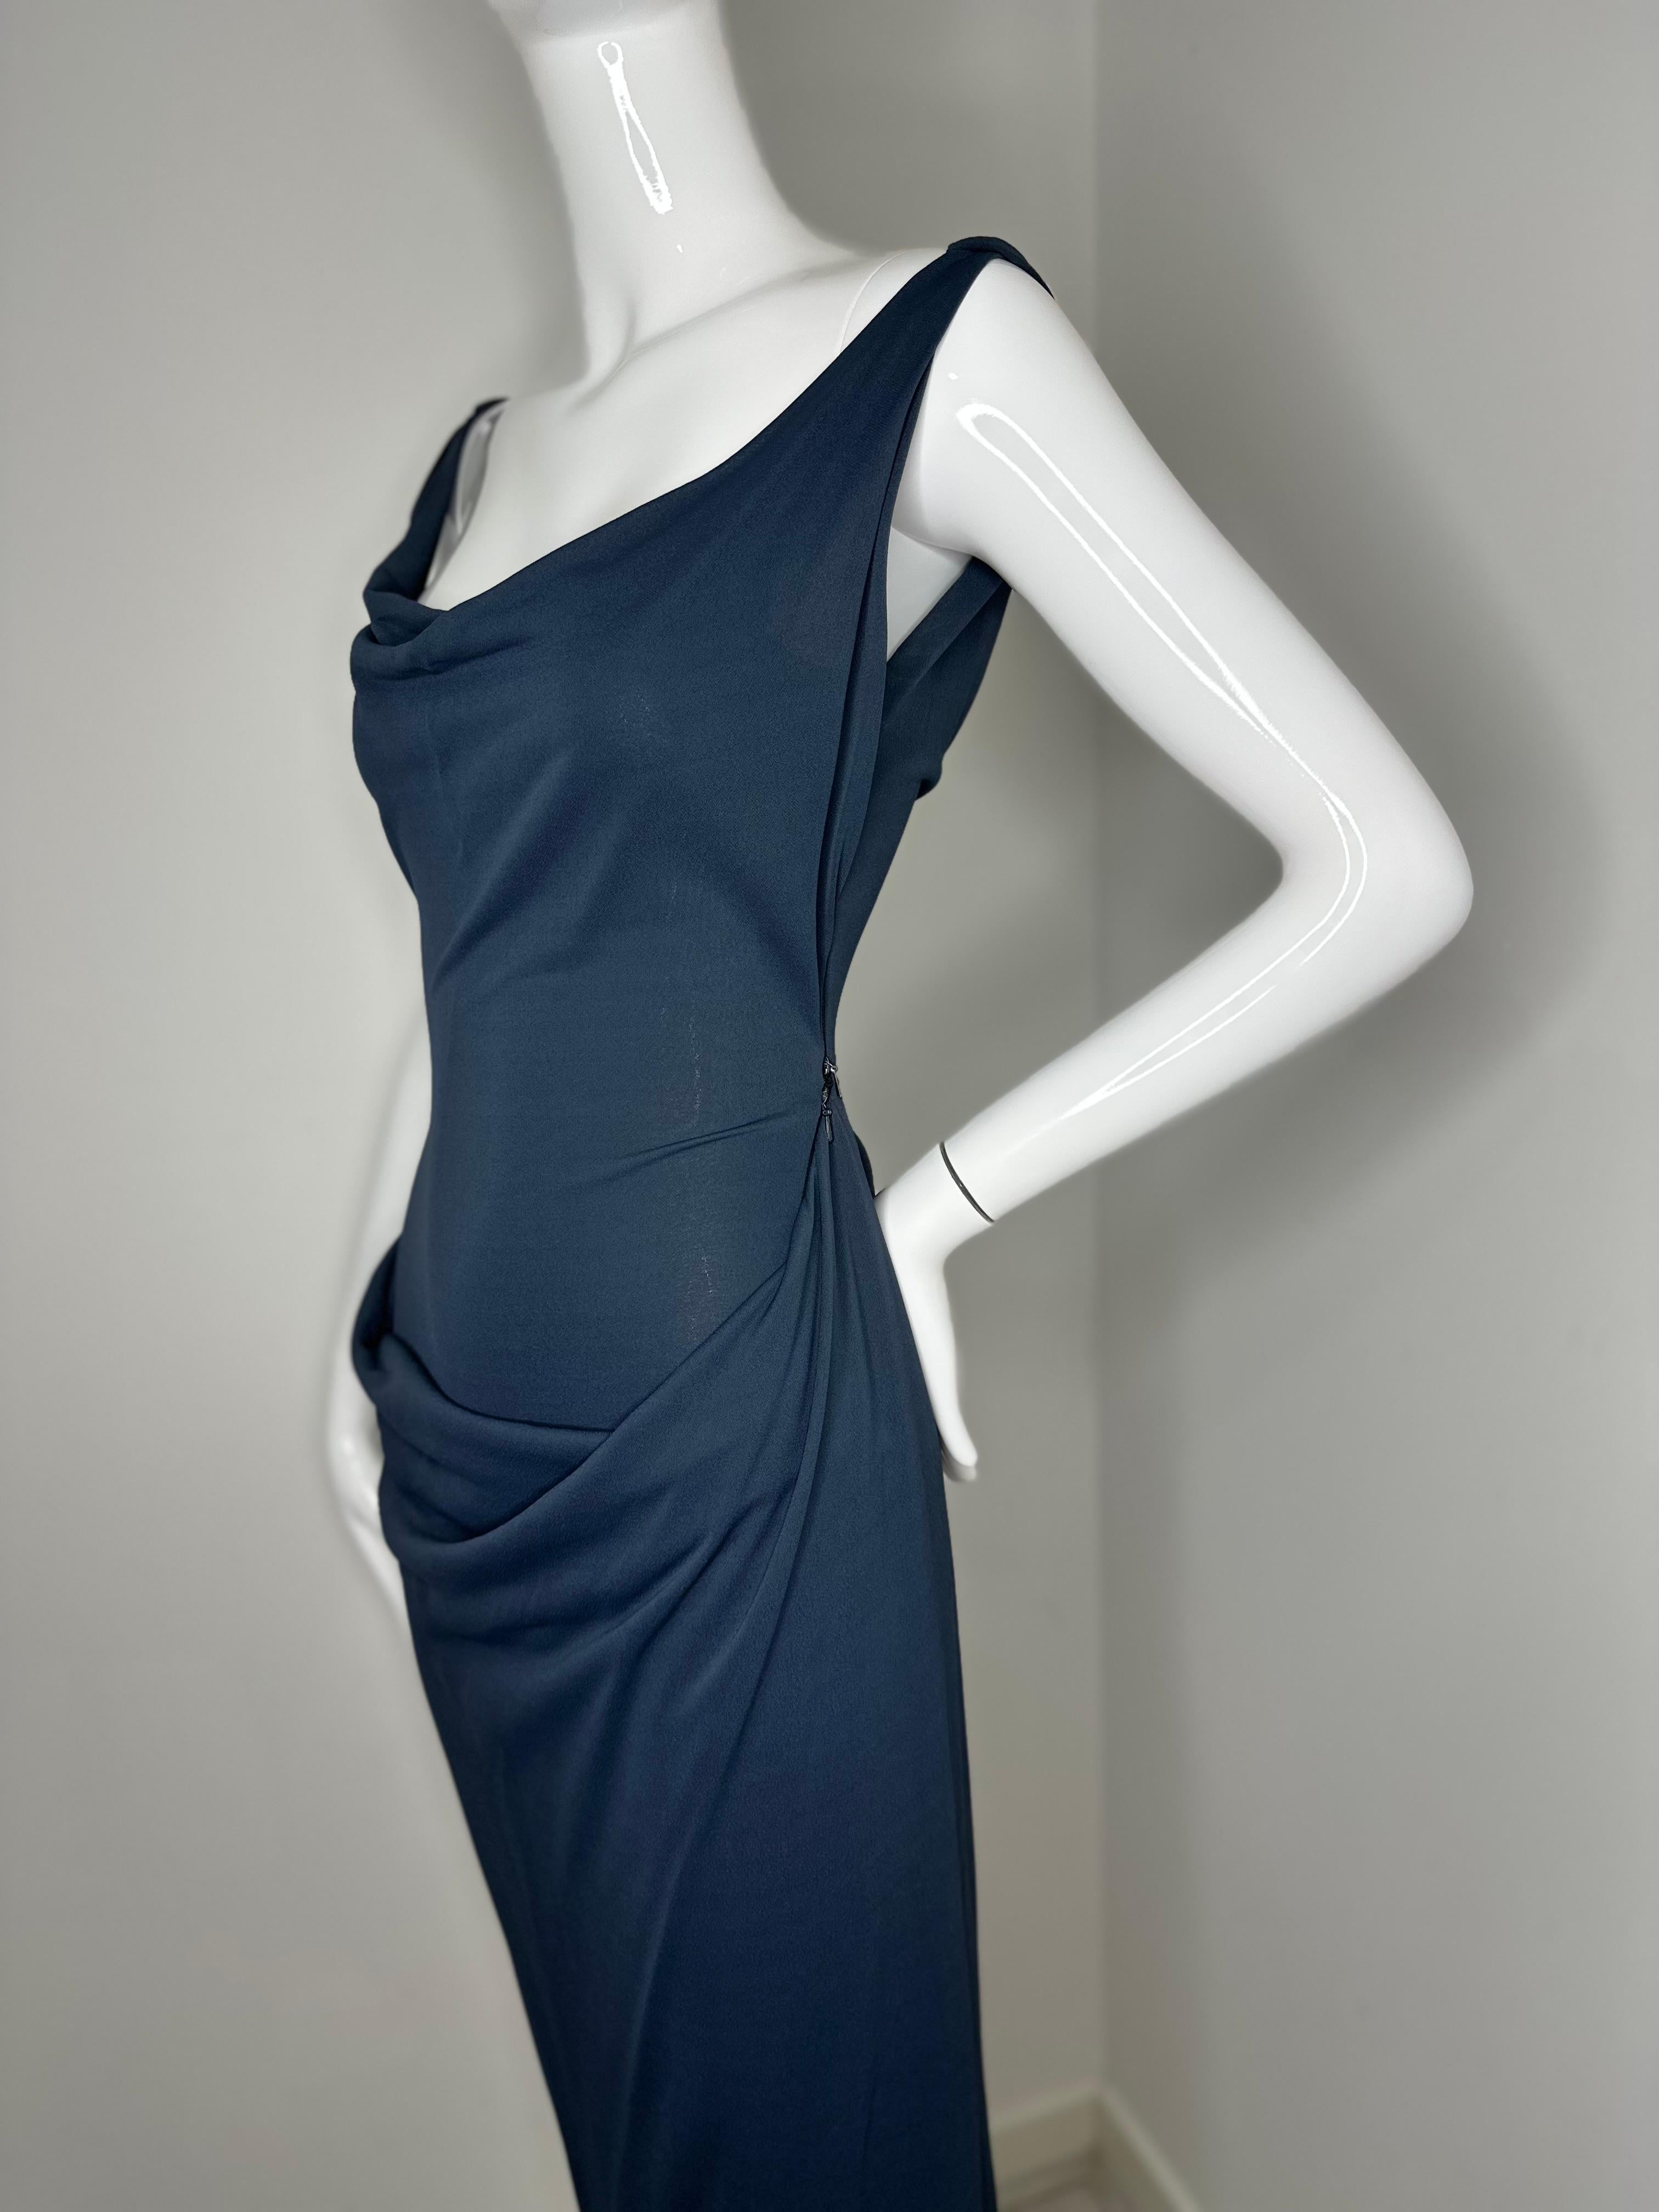 Collector’s item 

Vivienne Westwood 1997 midi dress
As seen on the runway modeled by Yasmeen Ghauri.
Good vintage condition, no rips or stain. Normal wear consistent with age 

Size on the tag 10. US 8 and It40. Corresponds more to a size XS. 
Max